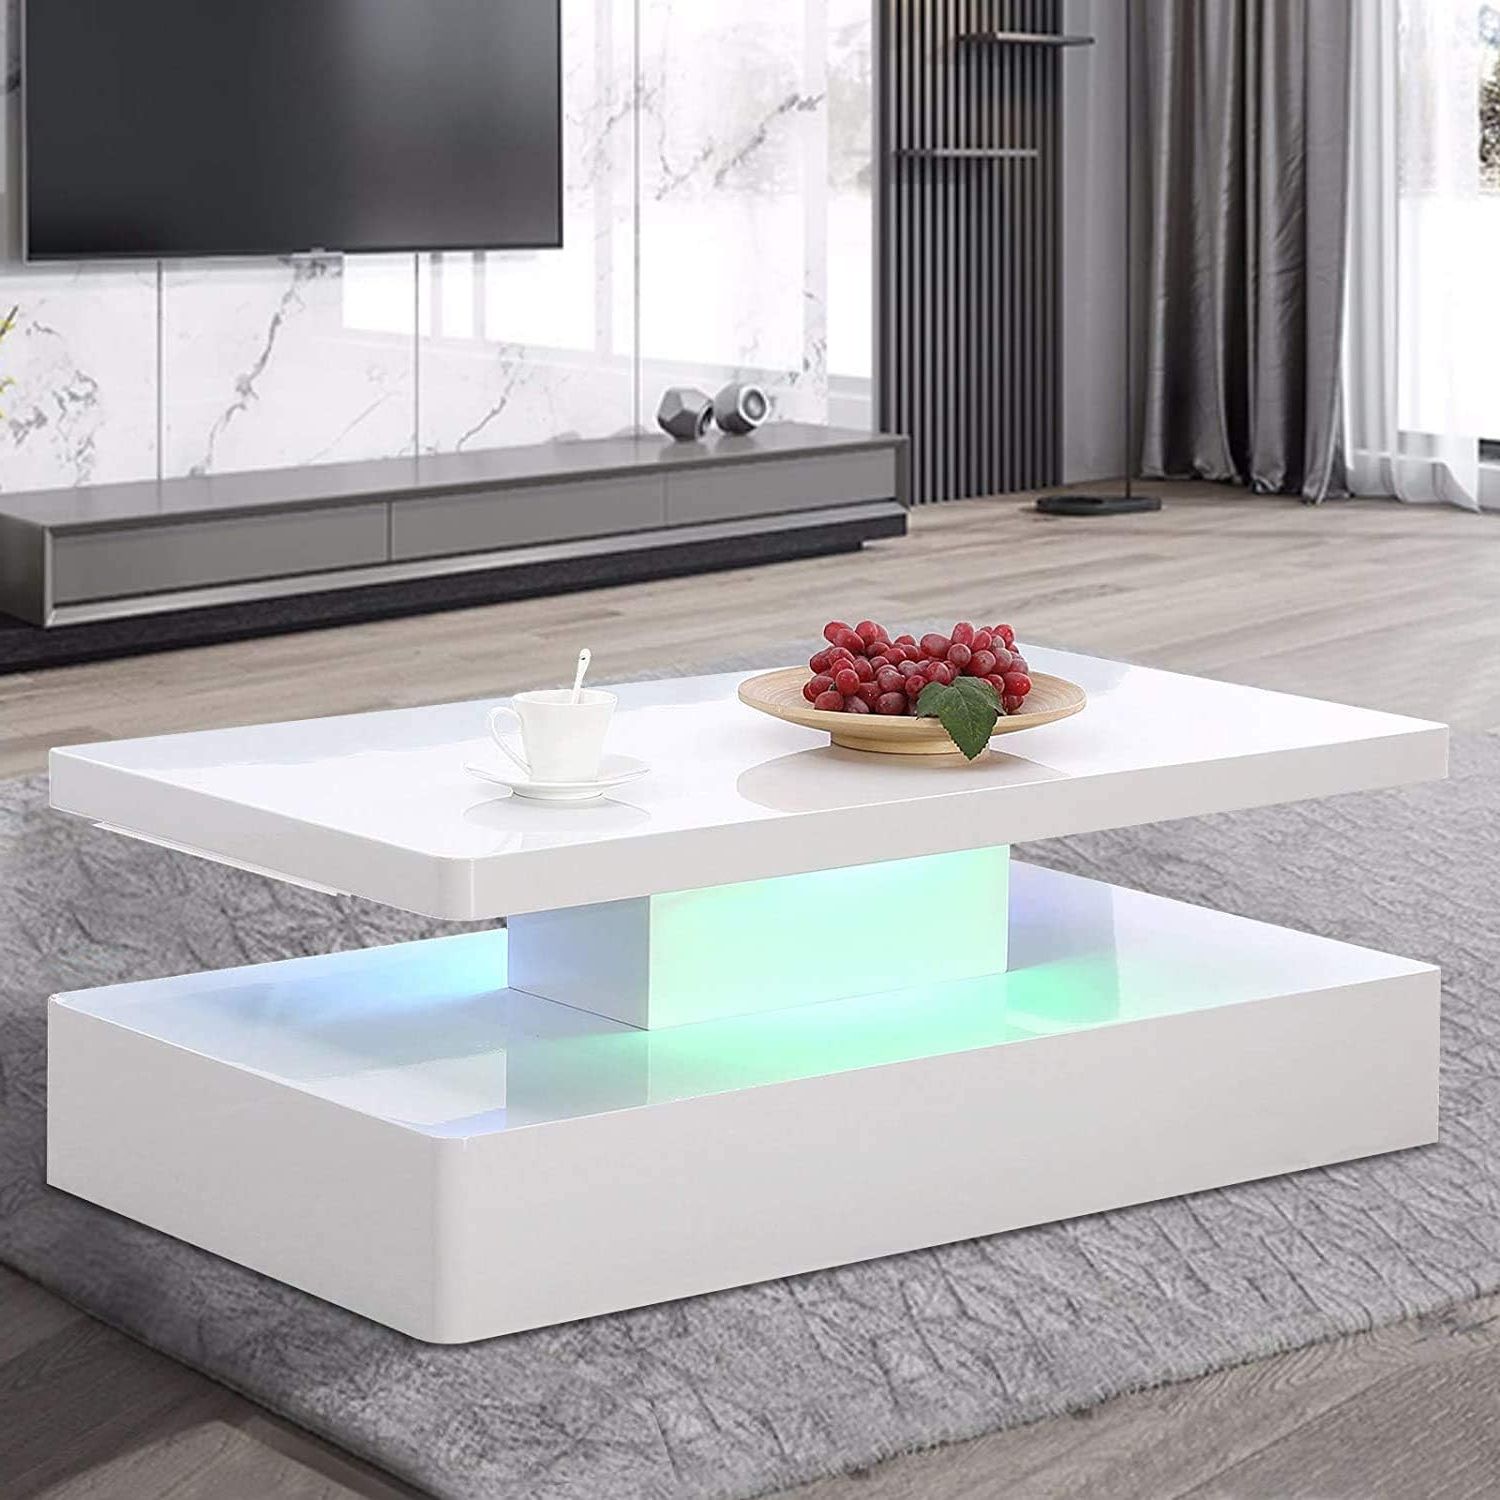 2019 Amazon: Mecor Modern Glossy White Coffee Table W/led Lighting, 2 In Coffee Tables With Led Lights (View 7 of 15)